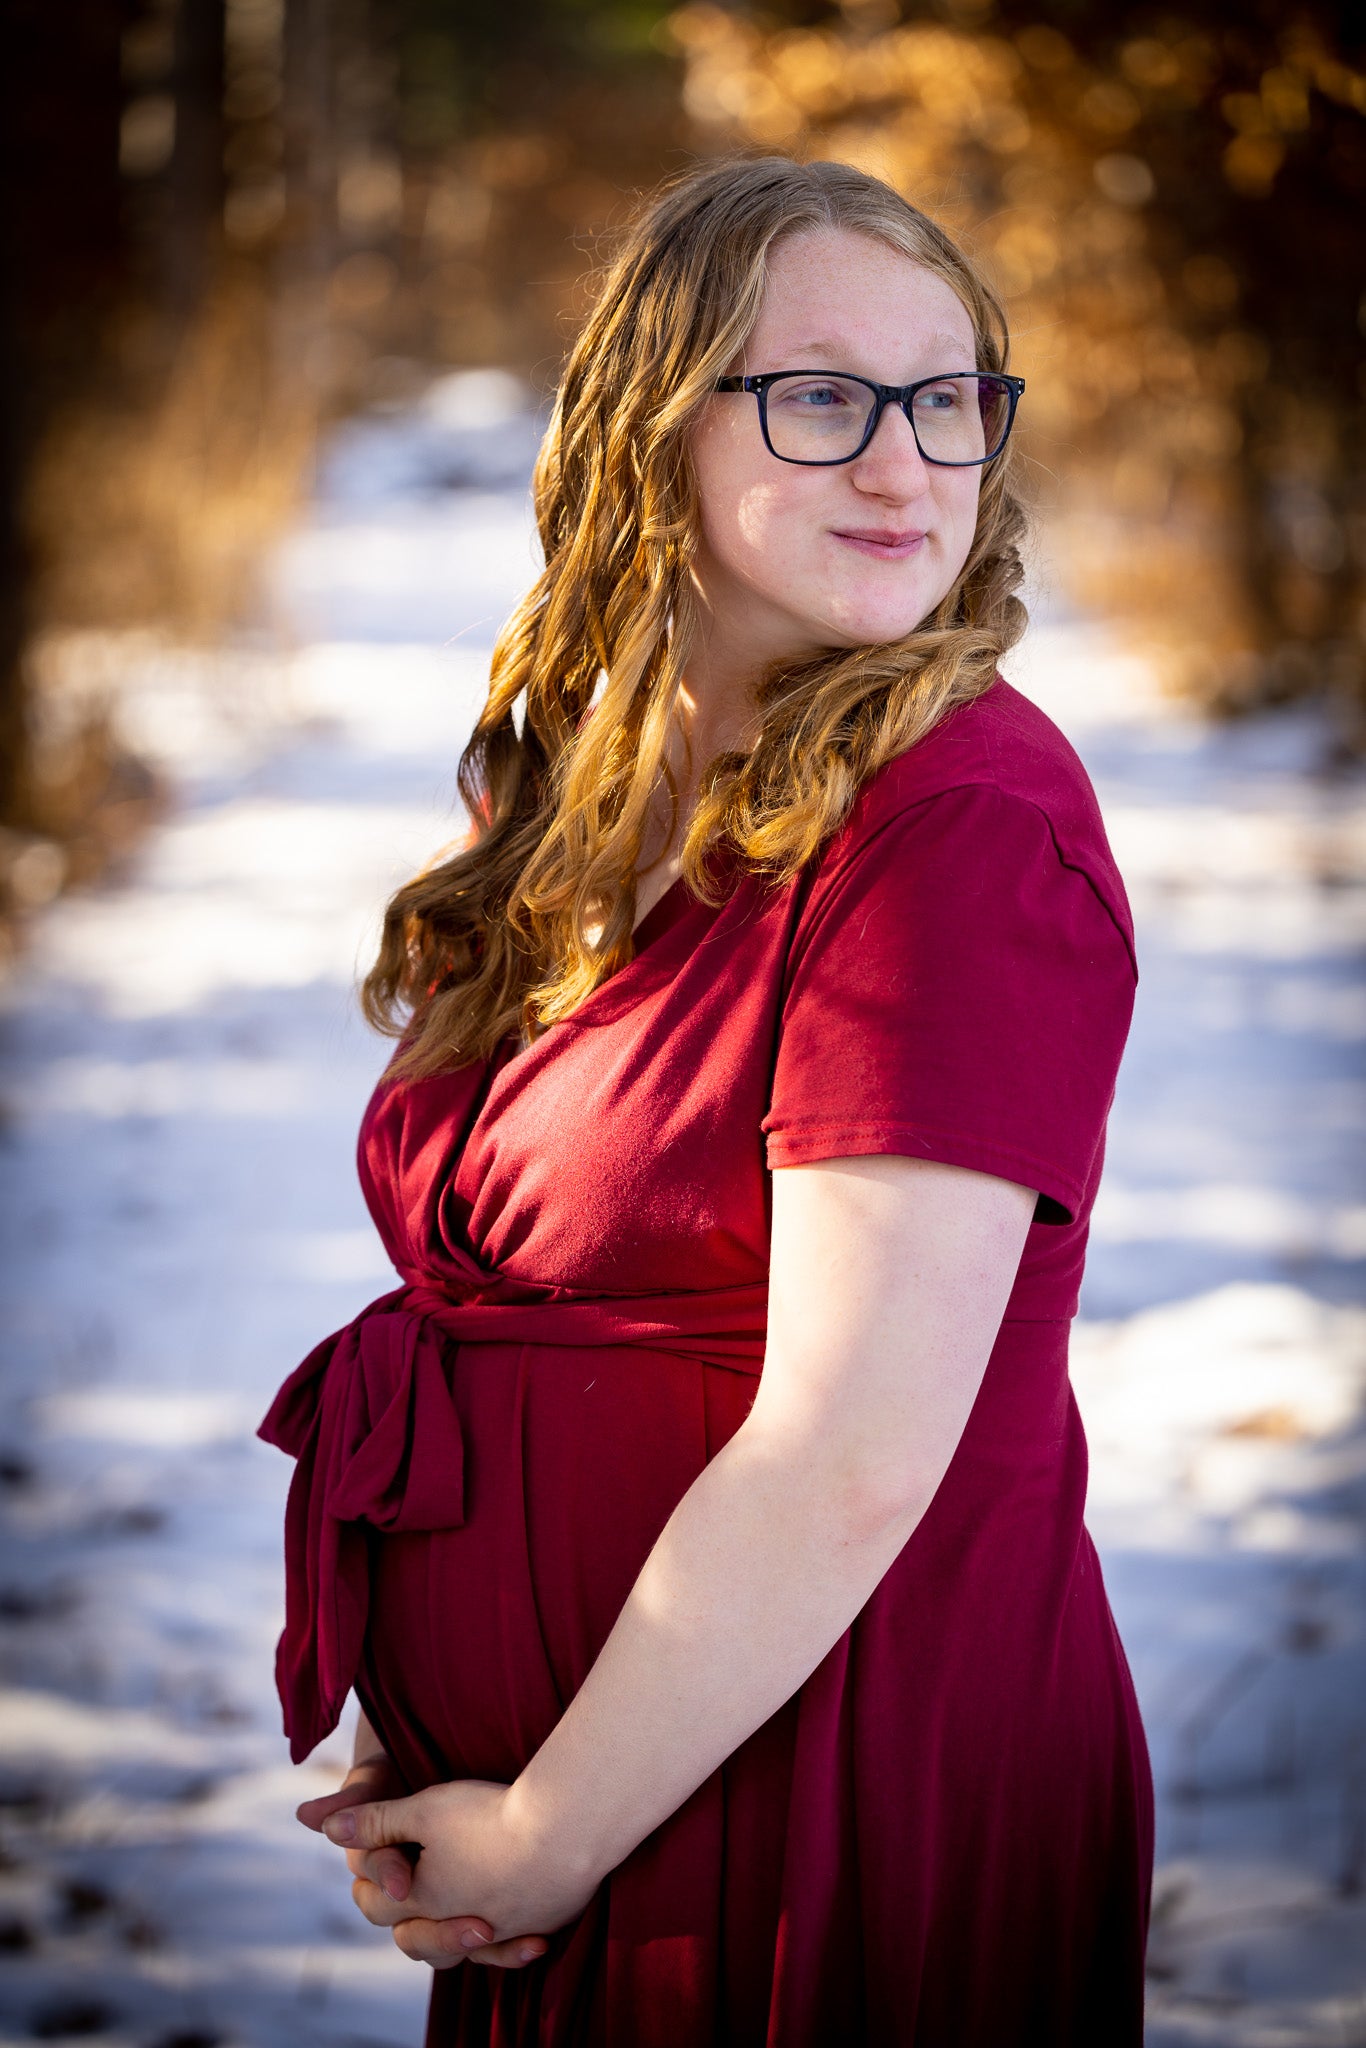 2023 Holiday Mini Session at Copper Creek Nursery